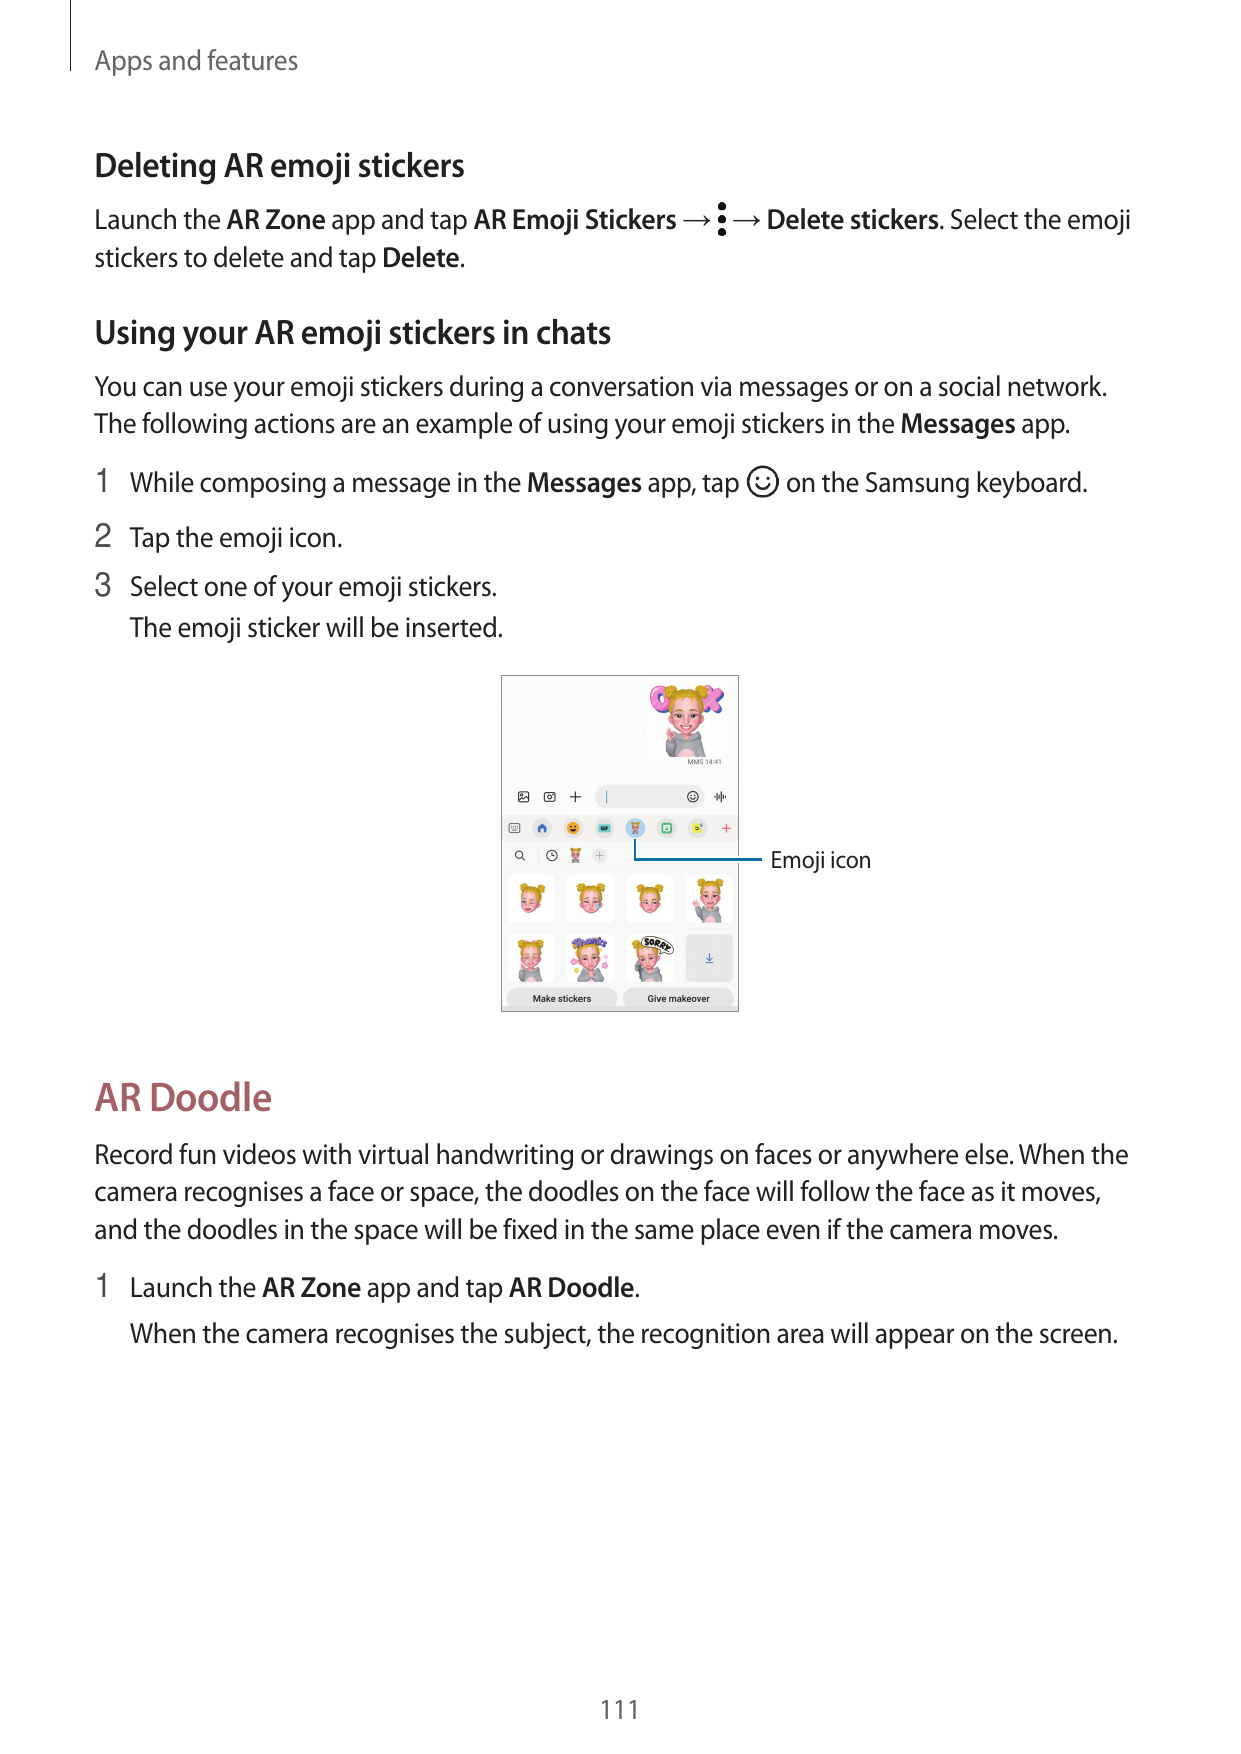 Apps and featuresDeleting AR emoji stickersLaunch the AR Zone app and tap AR Emoji Stickers → → Delete stickers. Select the emoj